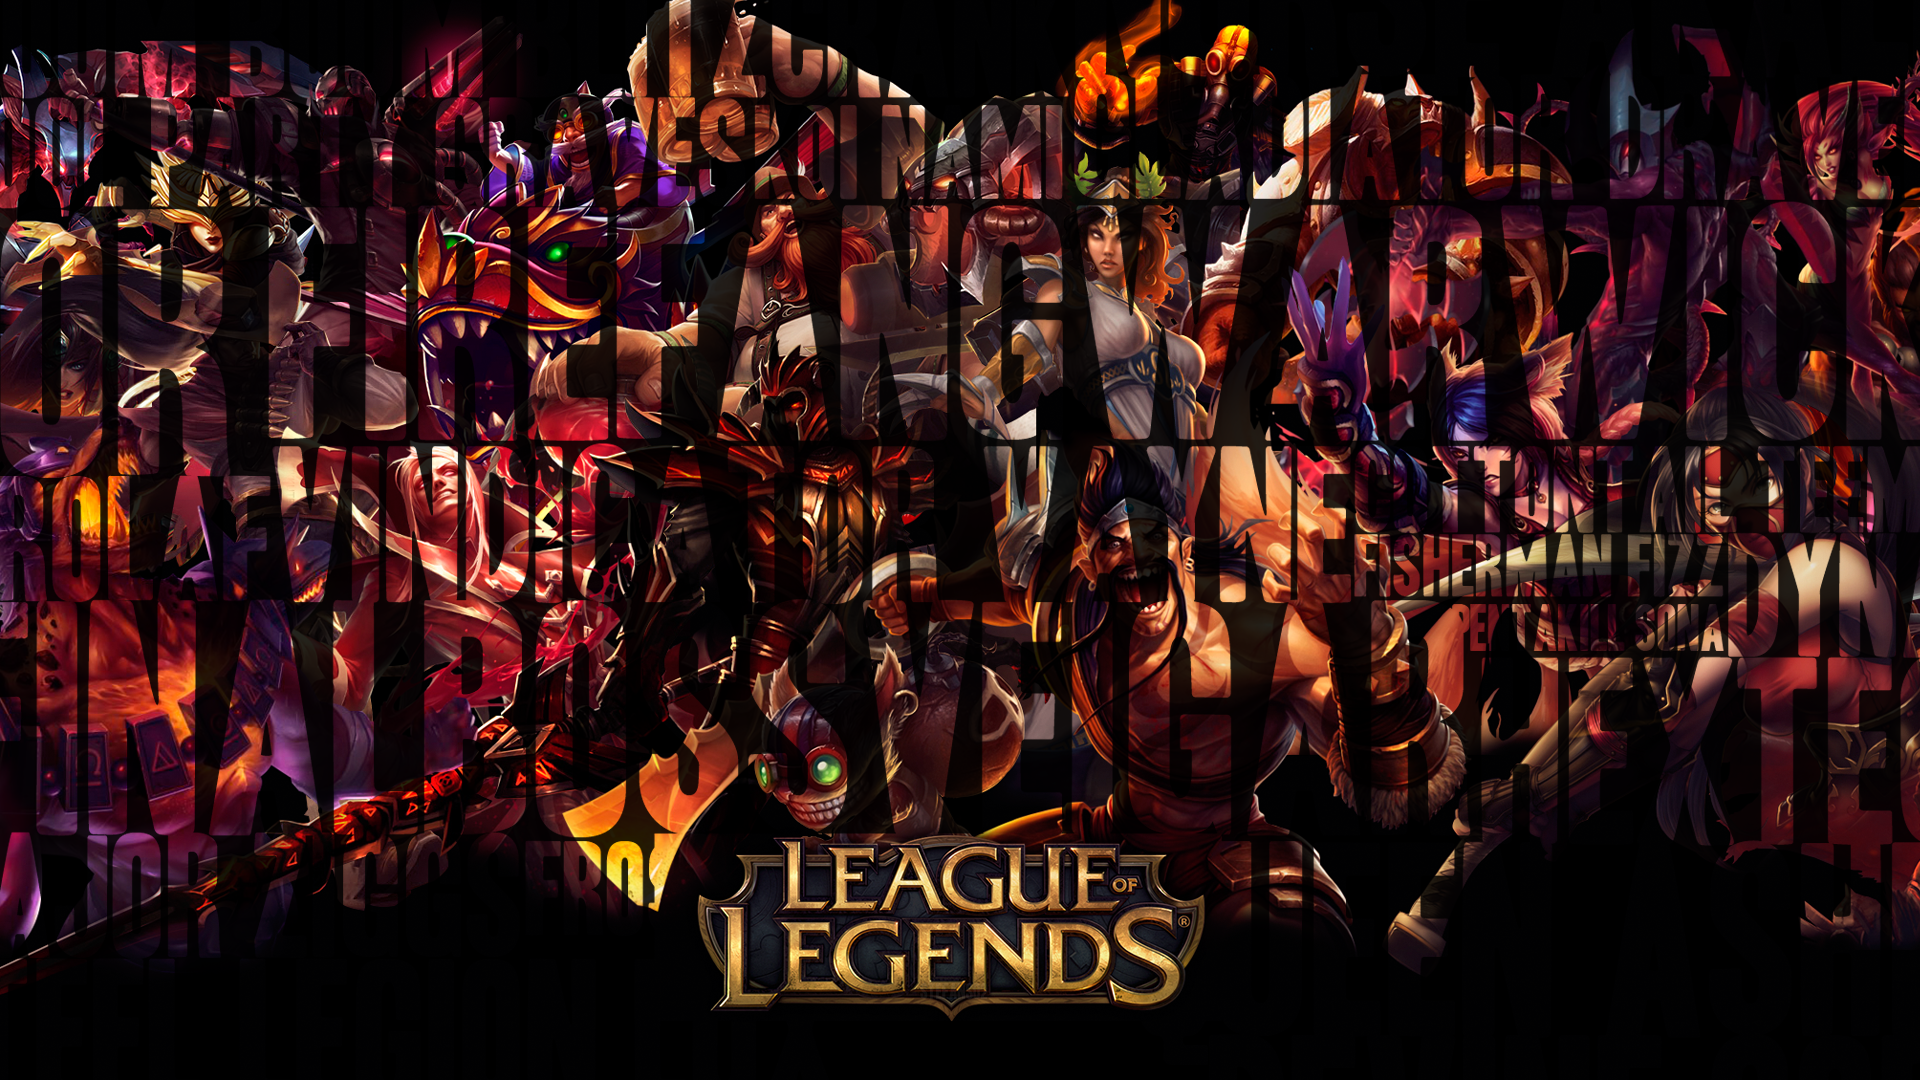 Download League of Legends Online Game HD Wallpaper Search more high